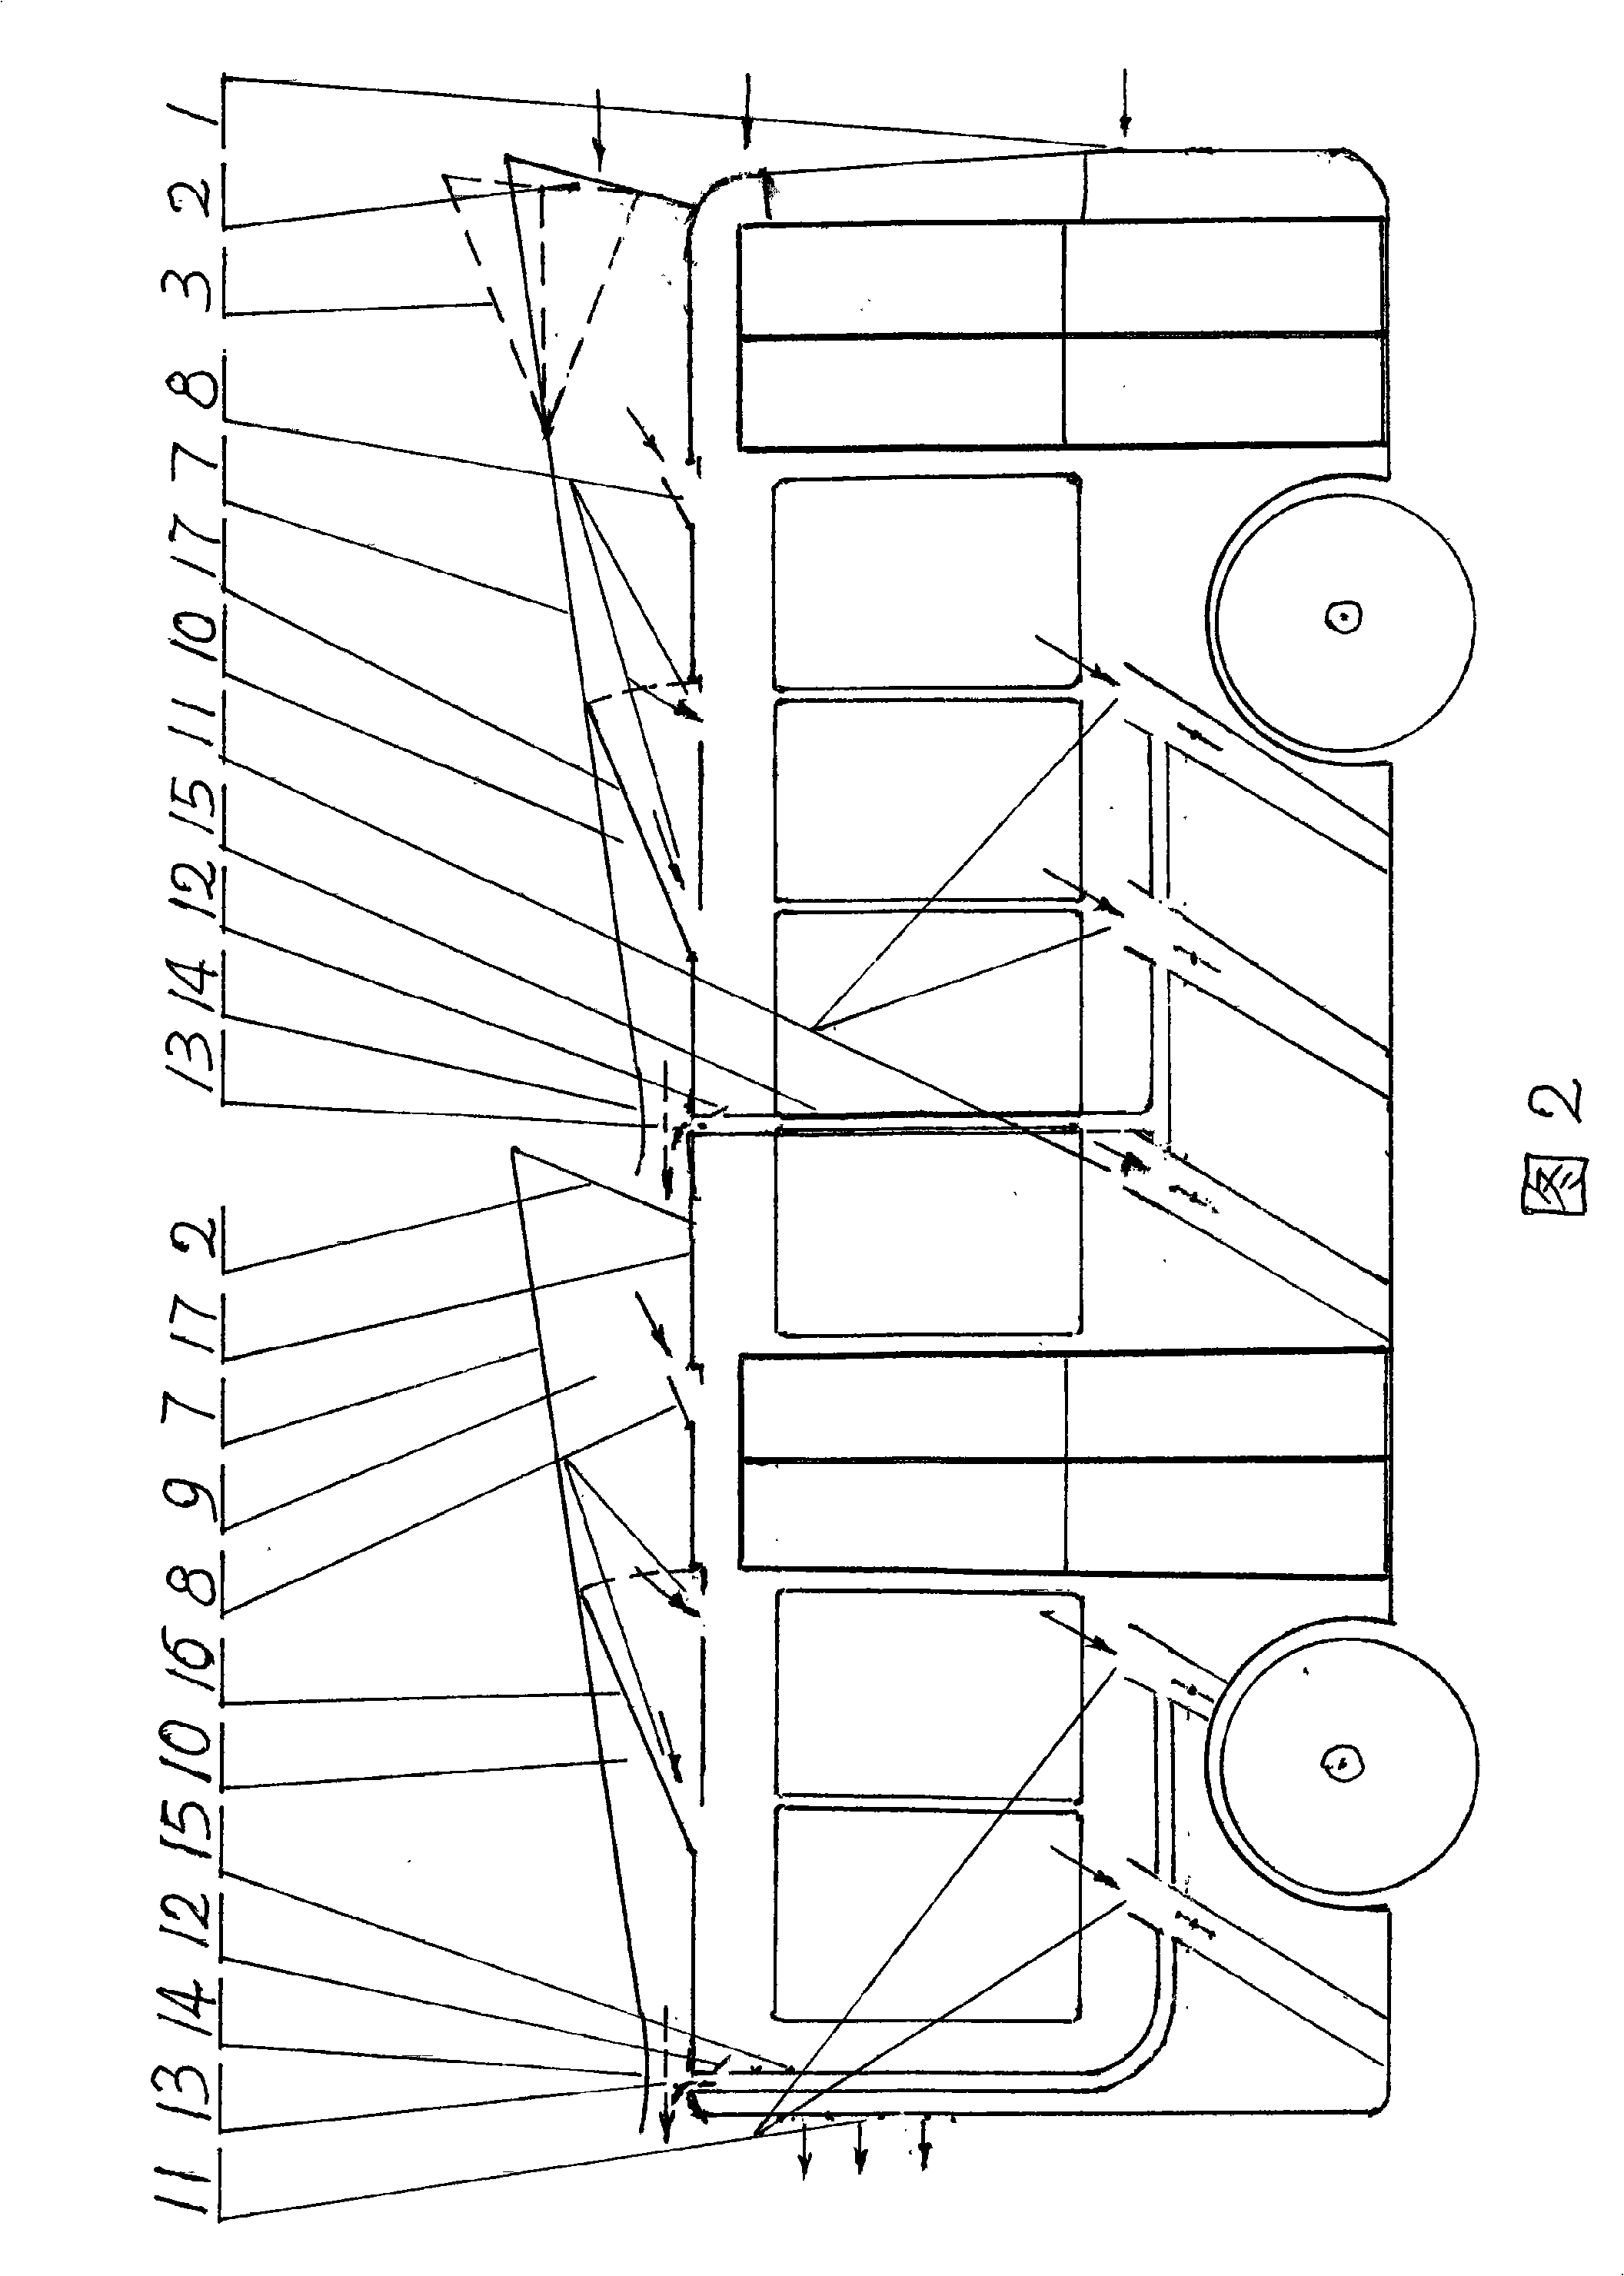 Device for automatically forcing to discharge and ventilate air for passenger car and driver's compartment